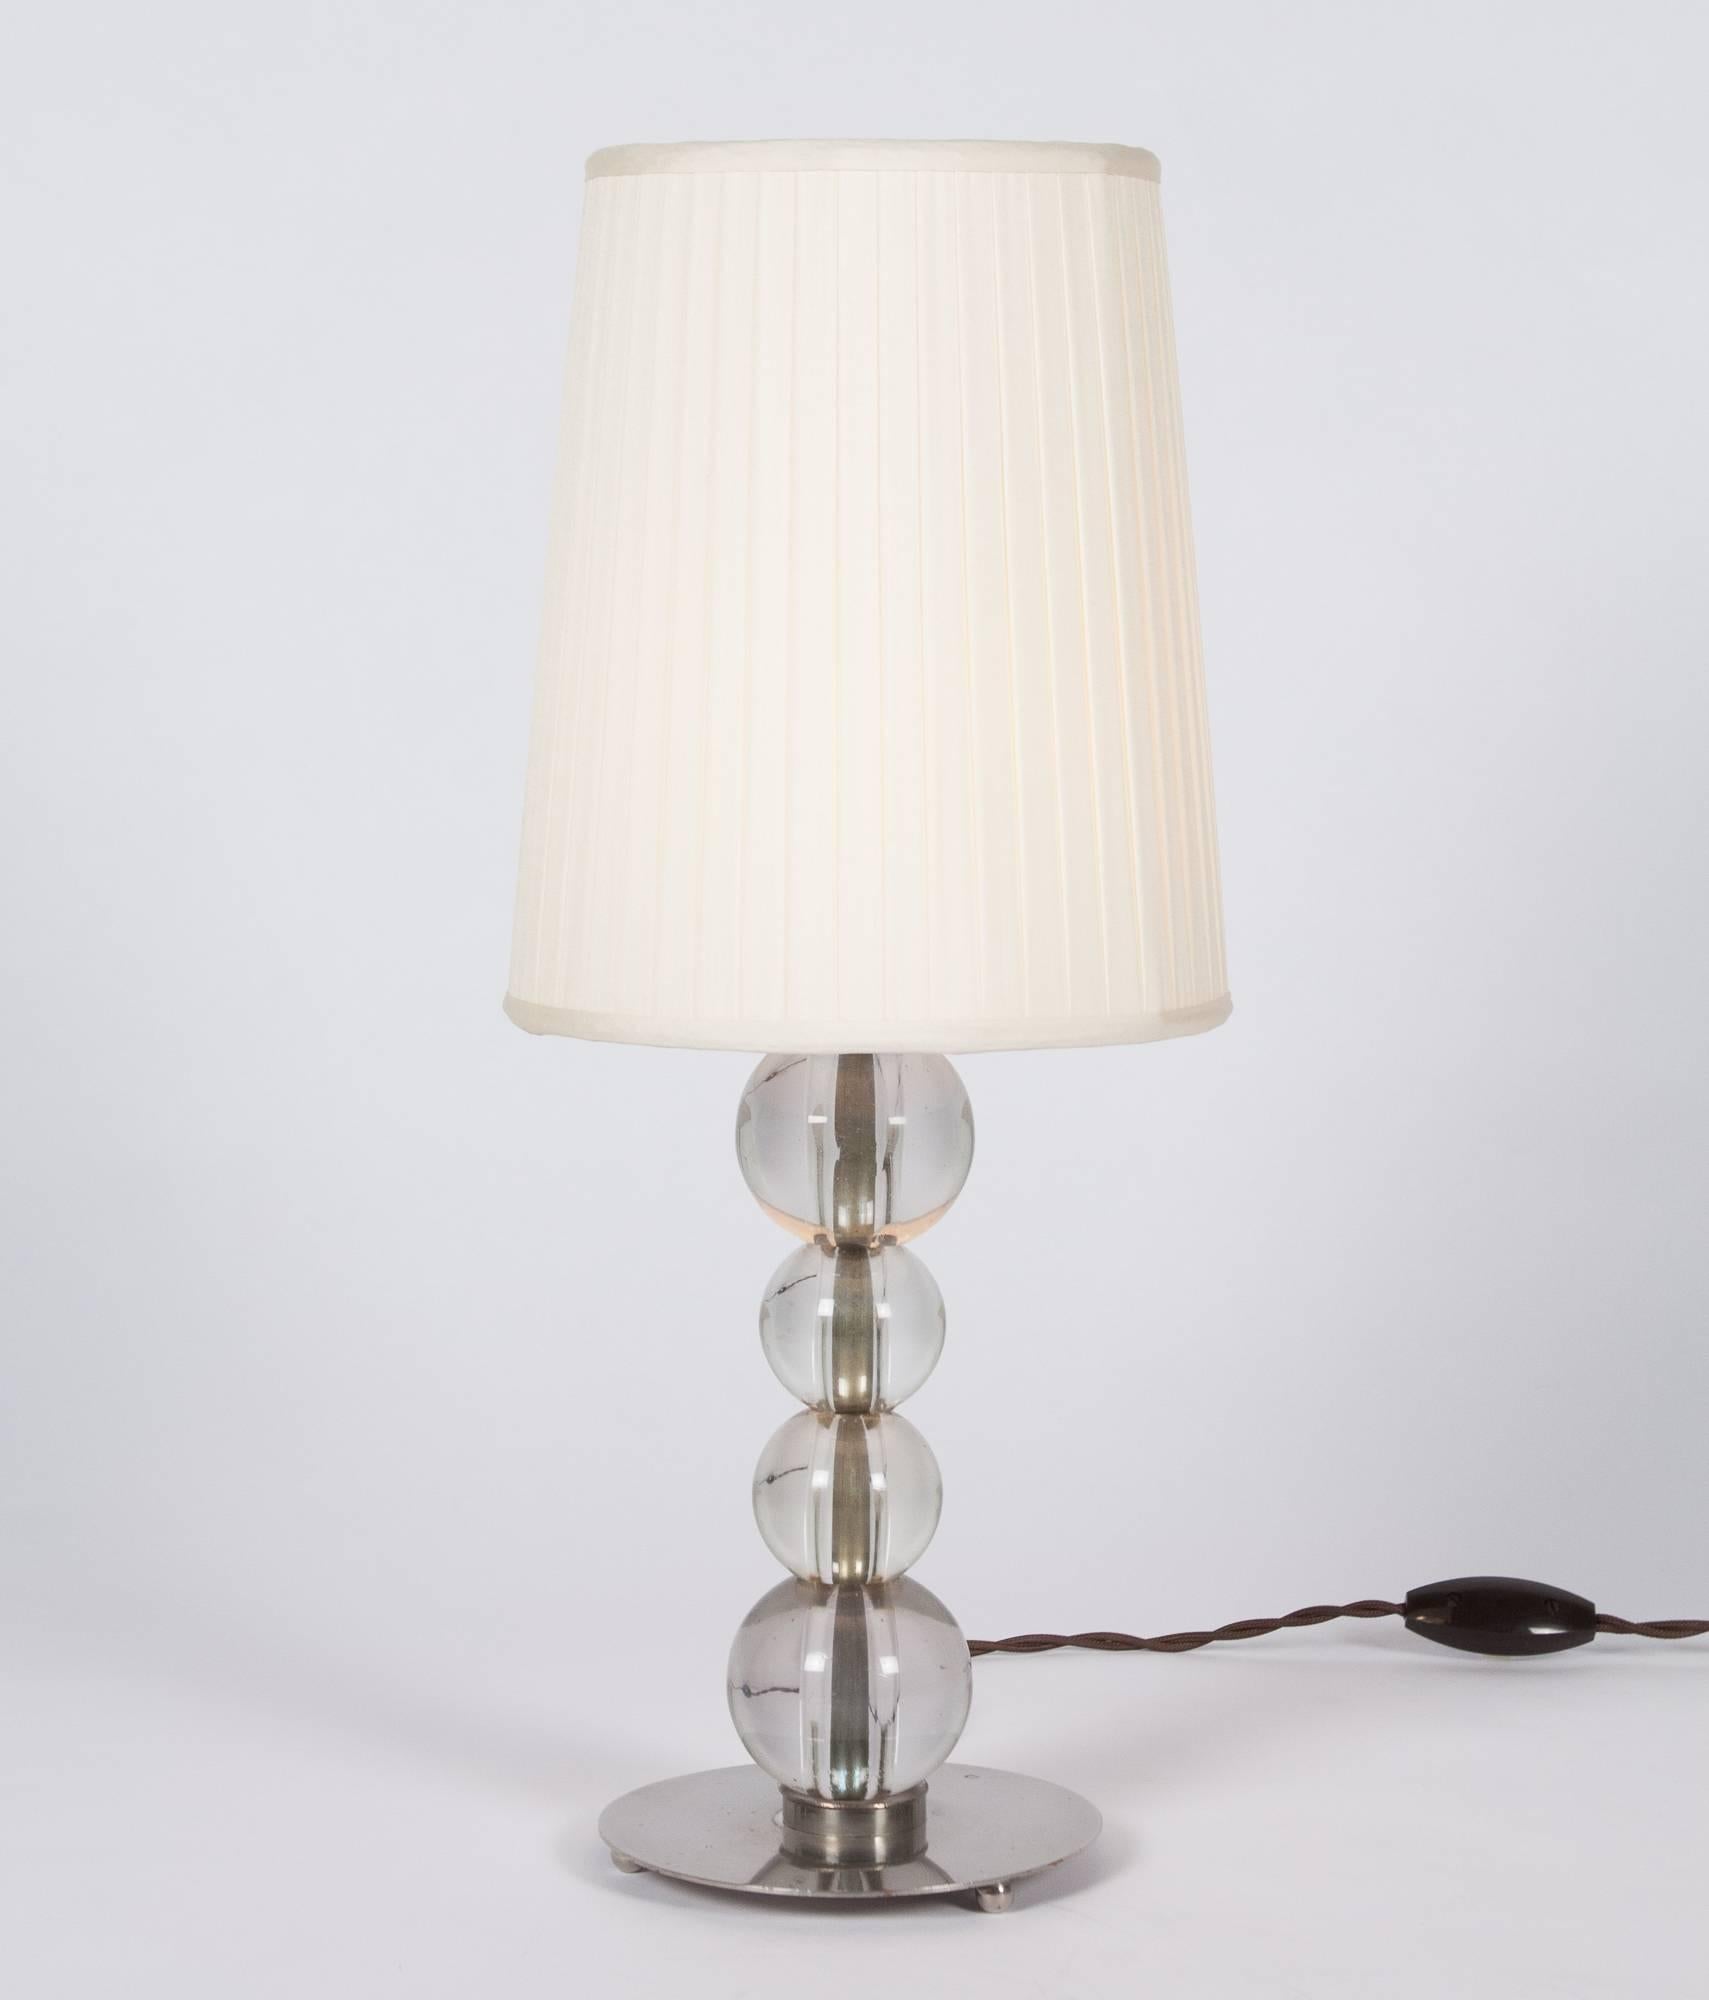 Jacques Adnet Attrib. Stacked Glass Ball Table Lamp, French, 1930s For Sale 1